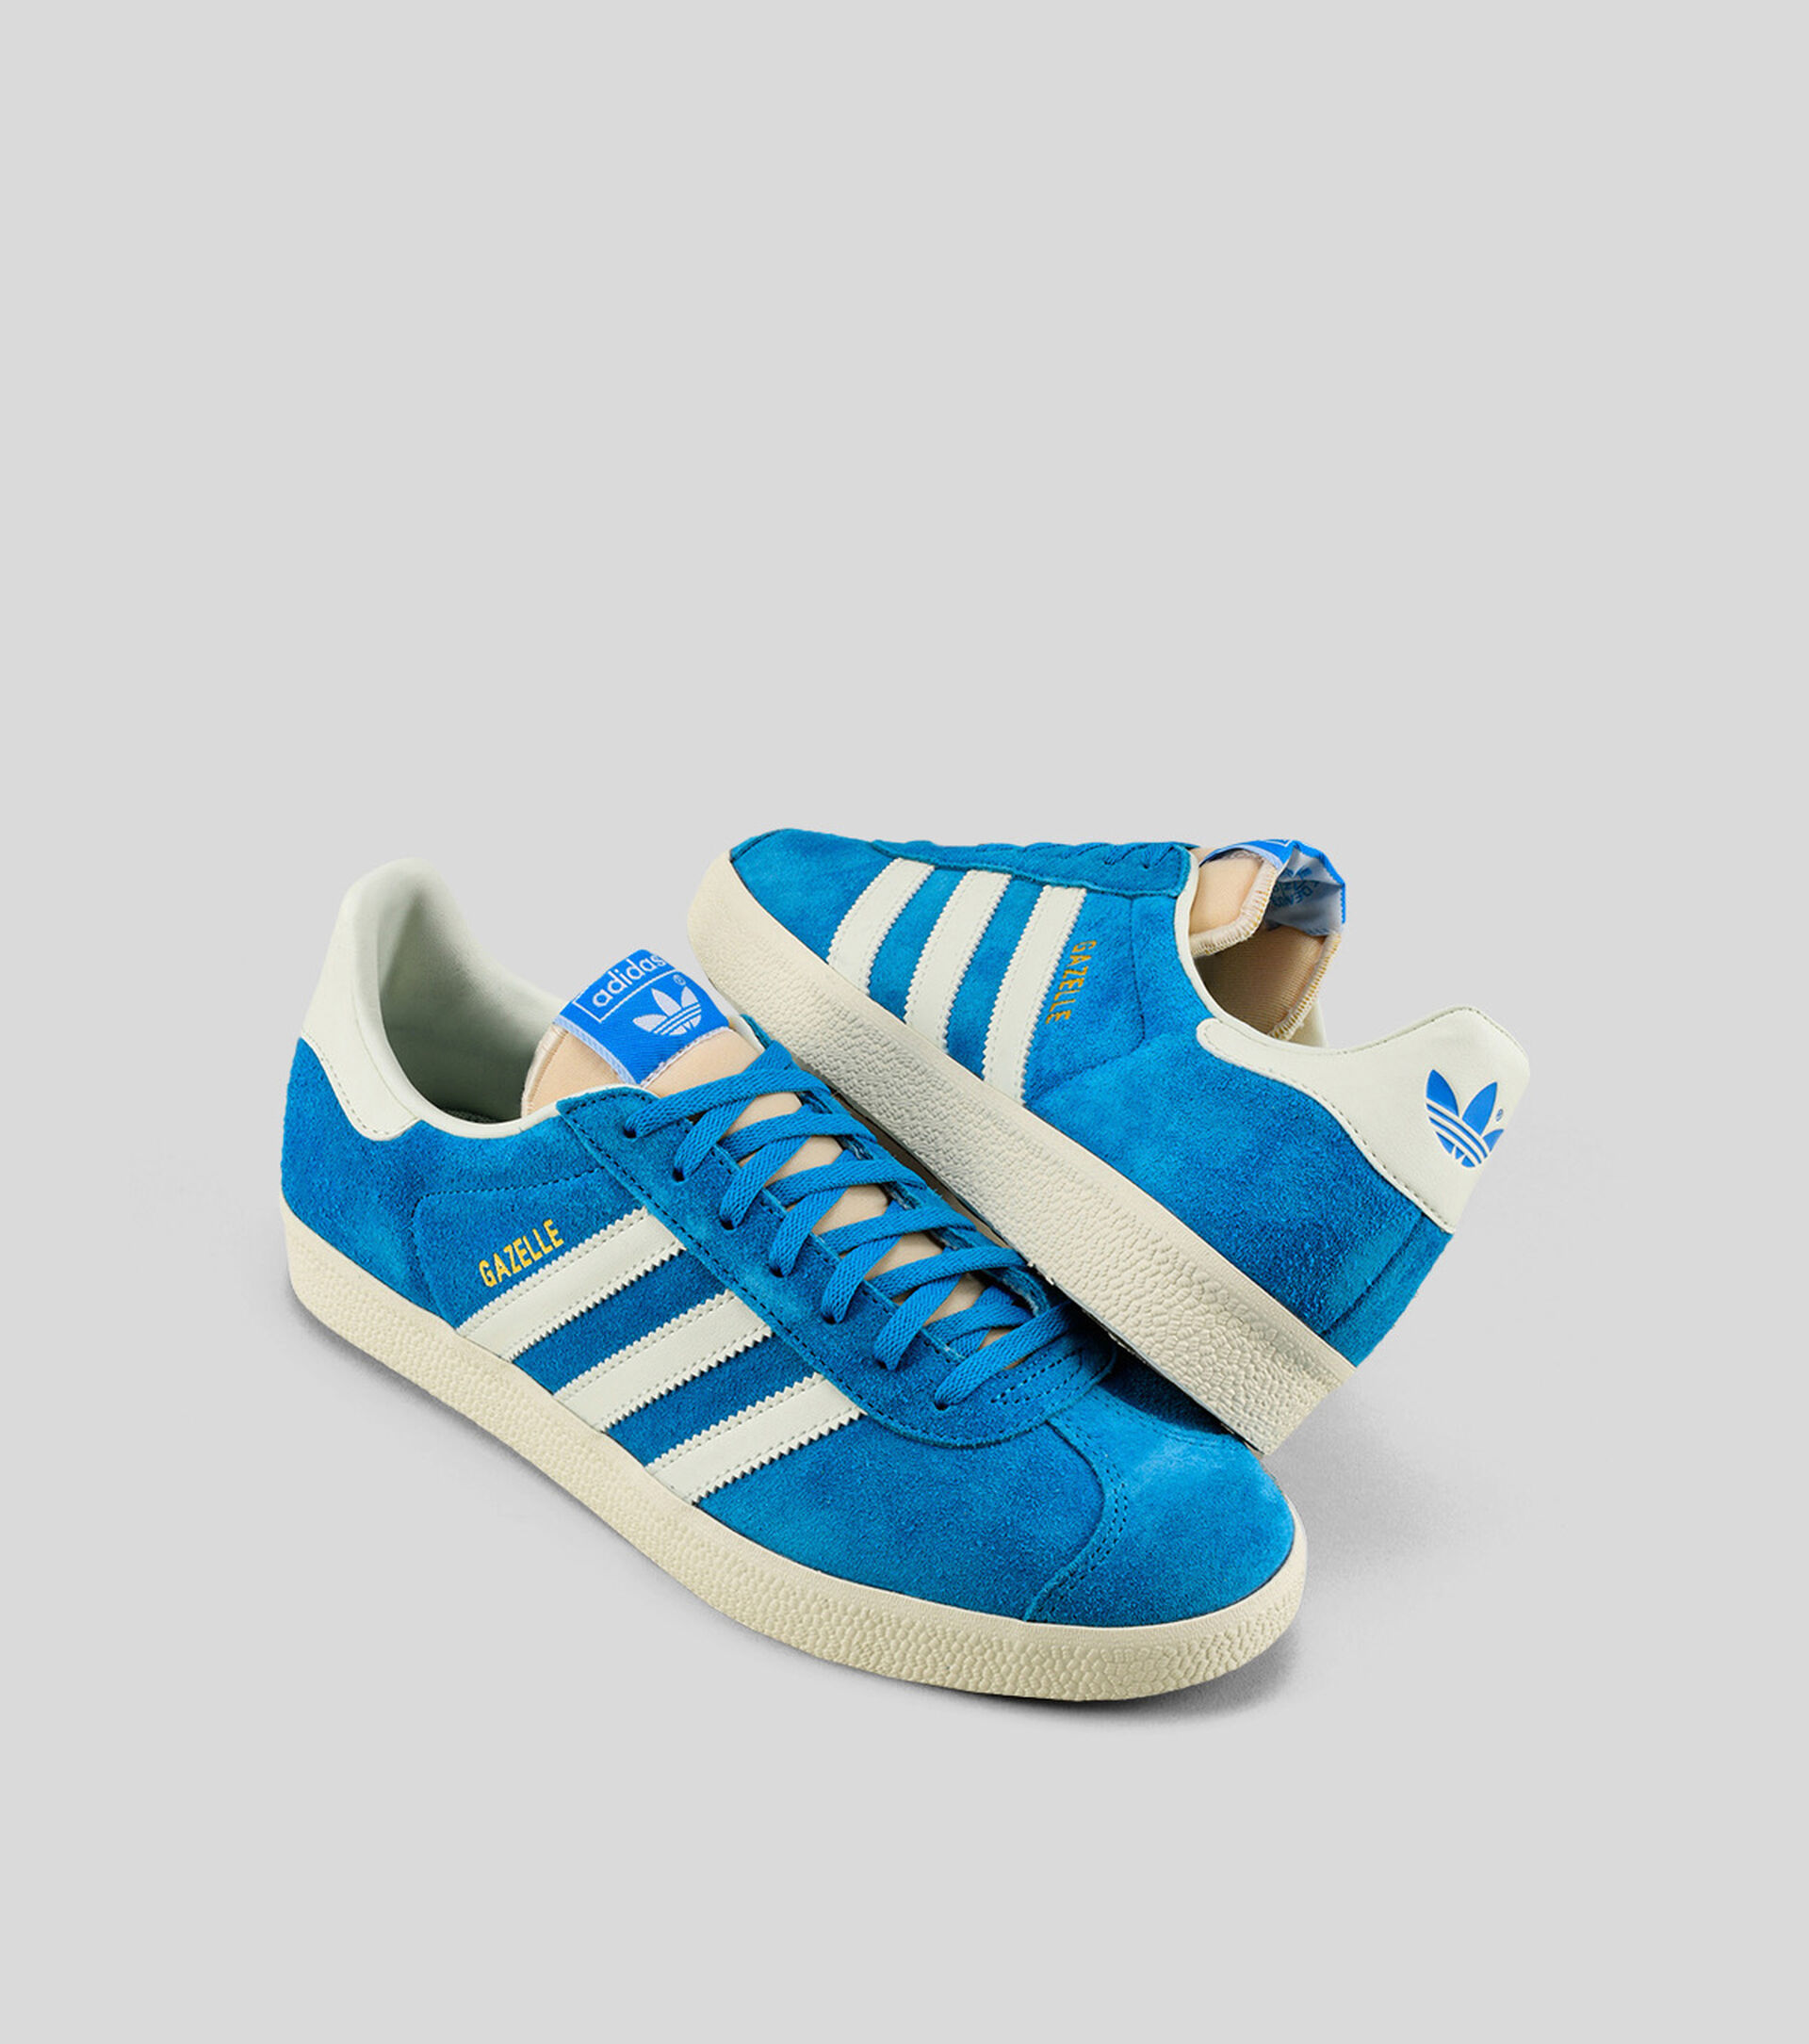 ADIDAS GAZELLE - Blue Suede | Browns Shoes